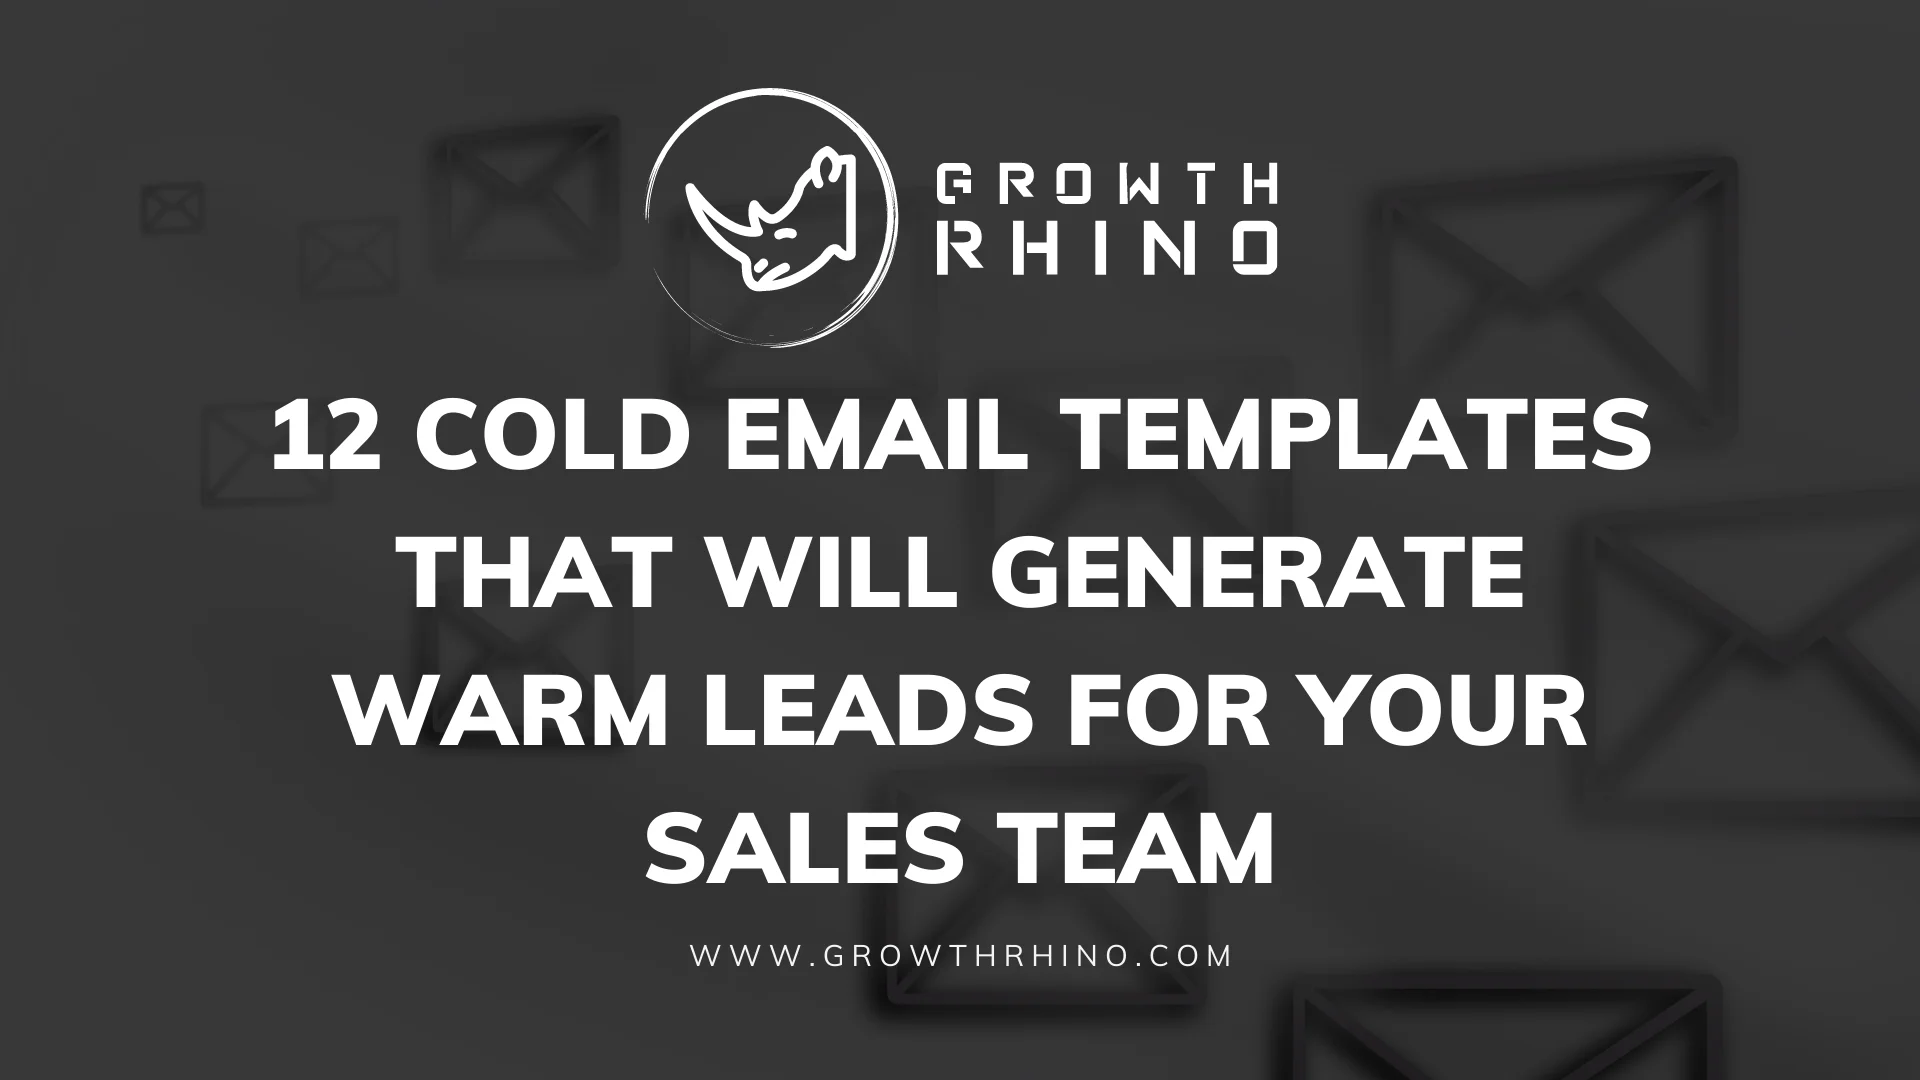 12 Cold Email Templates That Will Generate Warm Leads for Your Sales Team 